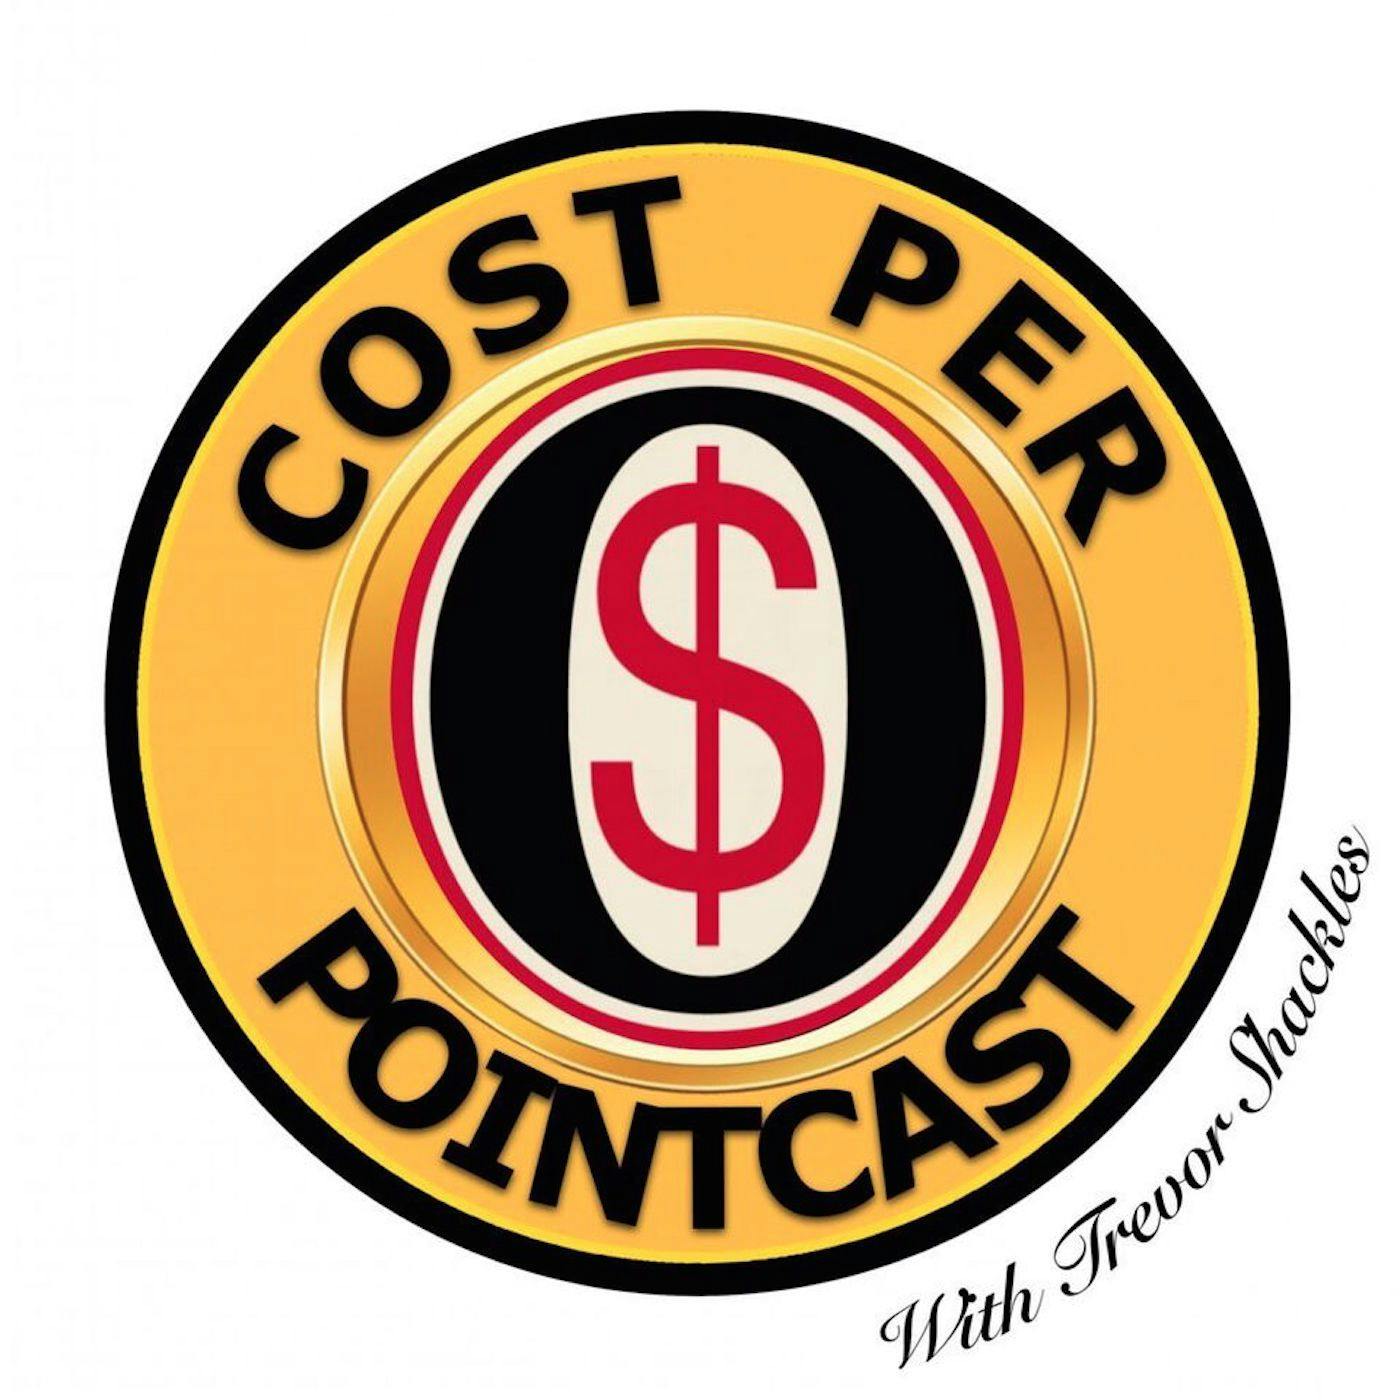 Cost Per Pointcast, Ep. 36: Has Melnyk Killed the LeBreton Deal?